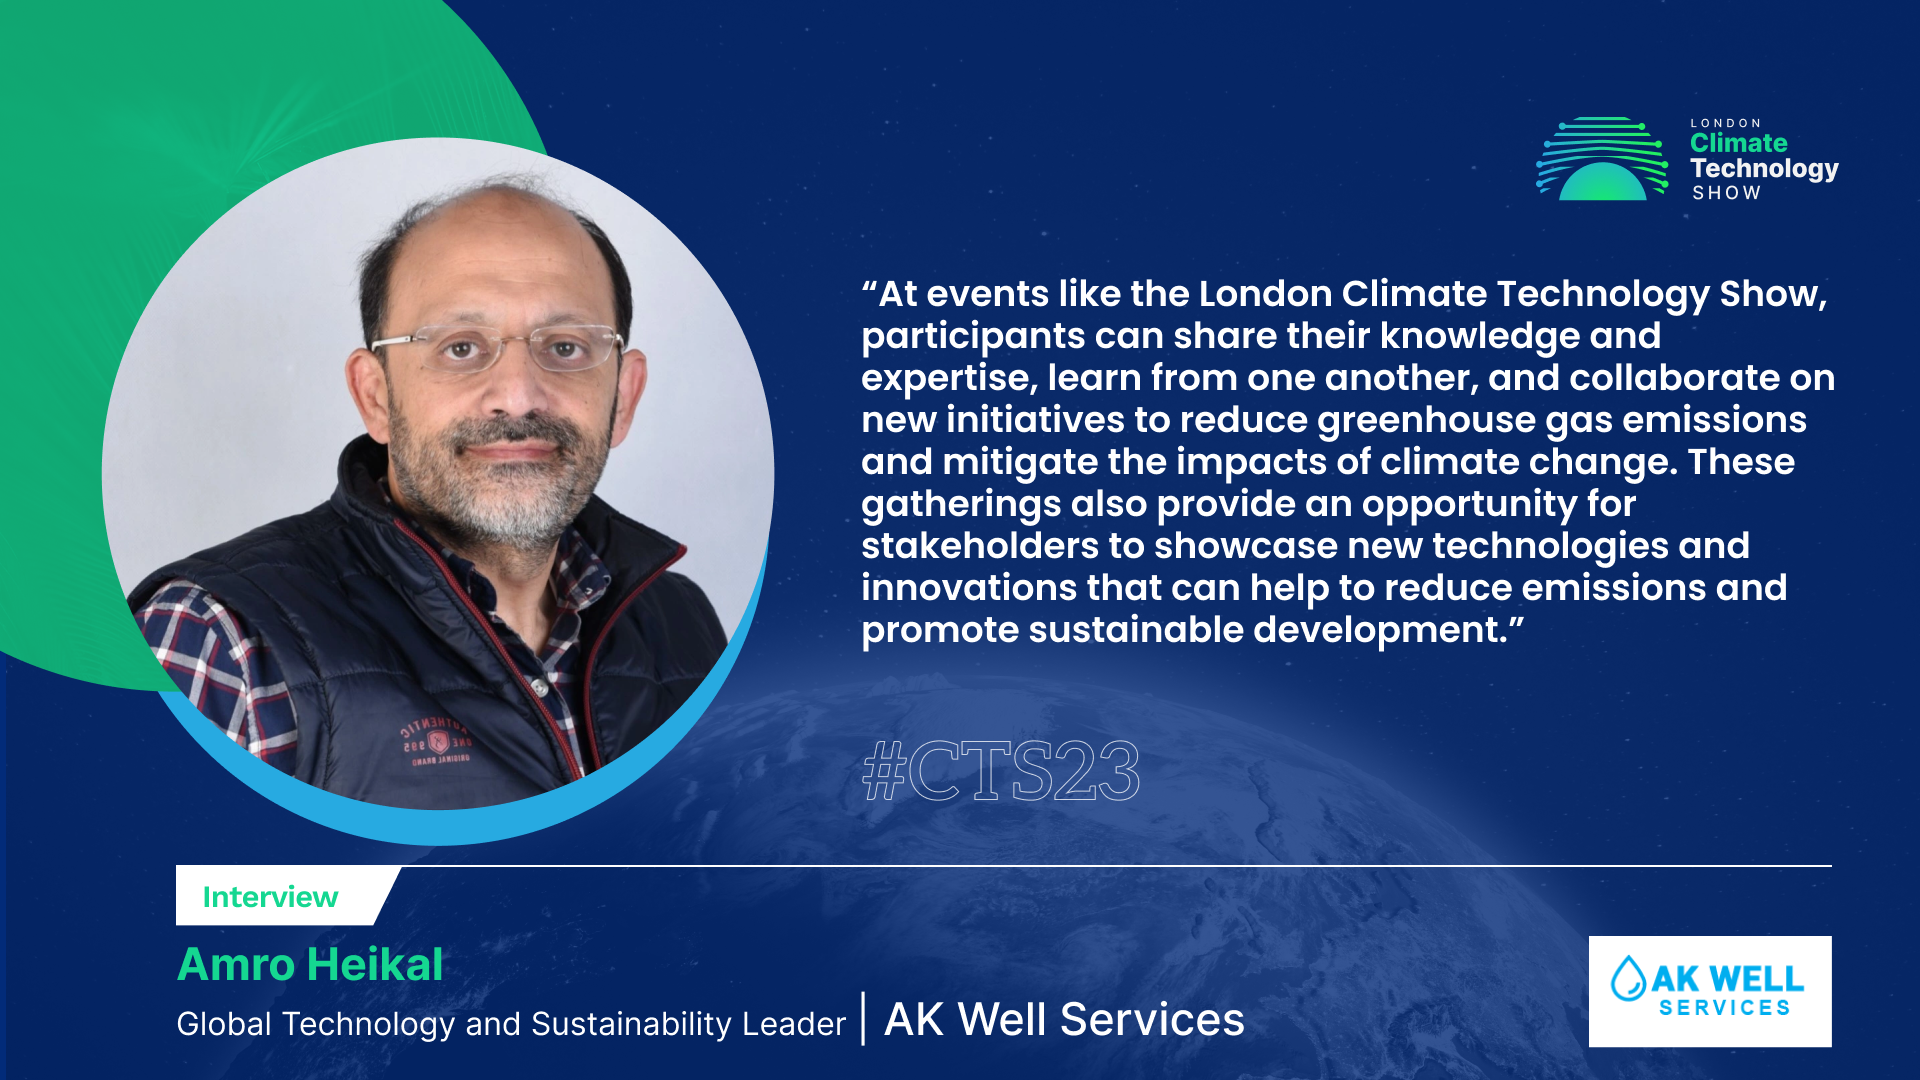 An Insightful Q&A Session with Amro Heikal, Global Technology and Sustainability Leader at AK Well Services